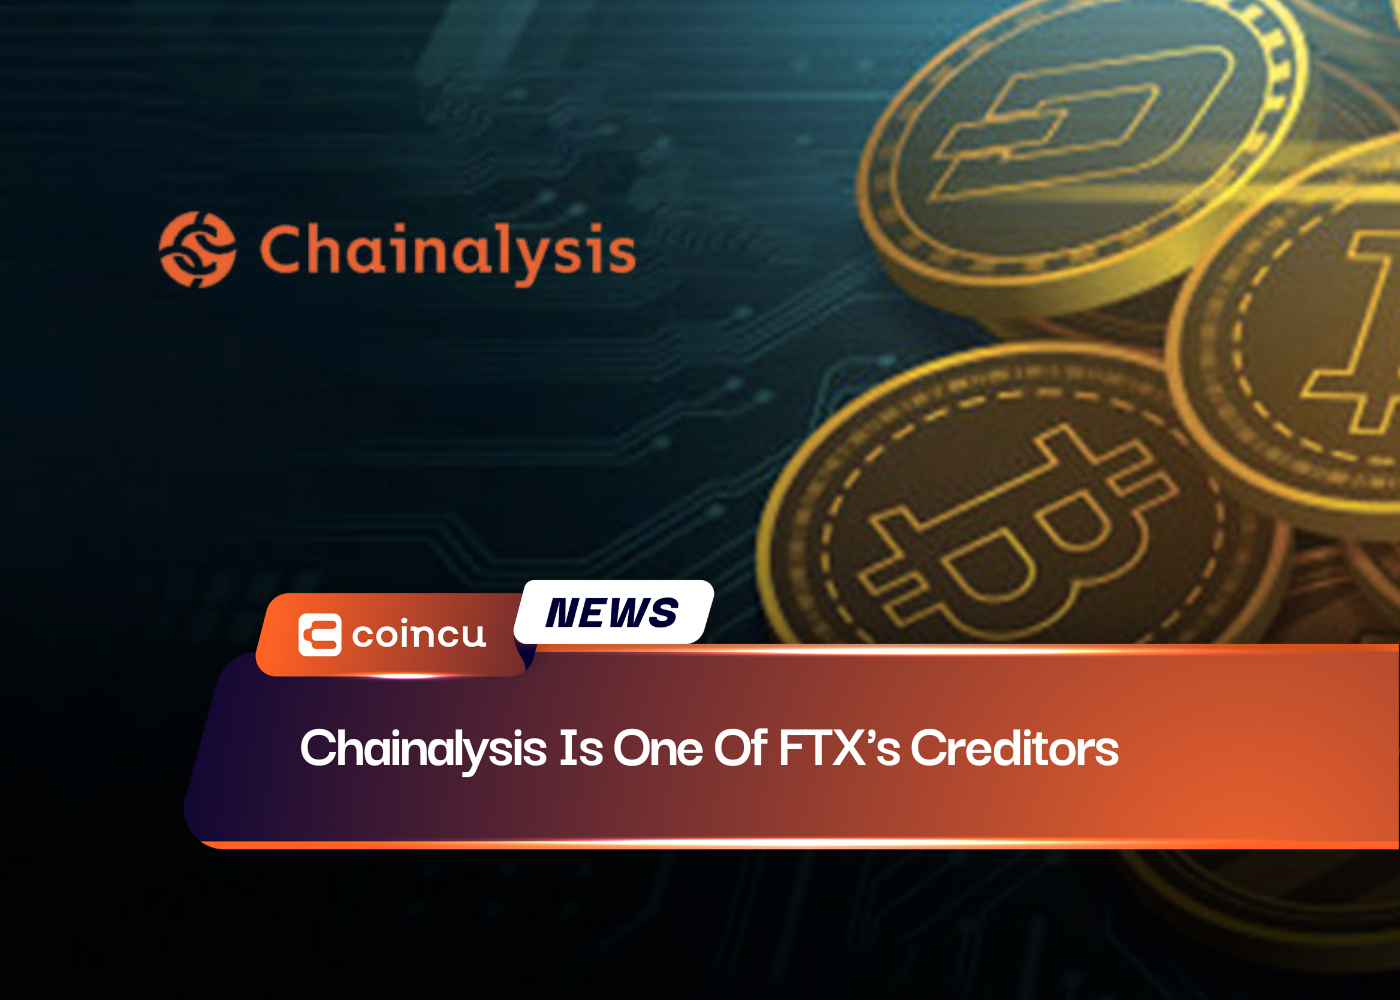 Chainalysis Is One Of FTX's Creditors